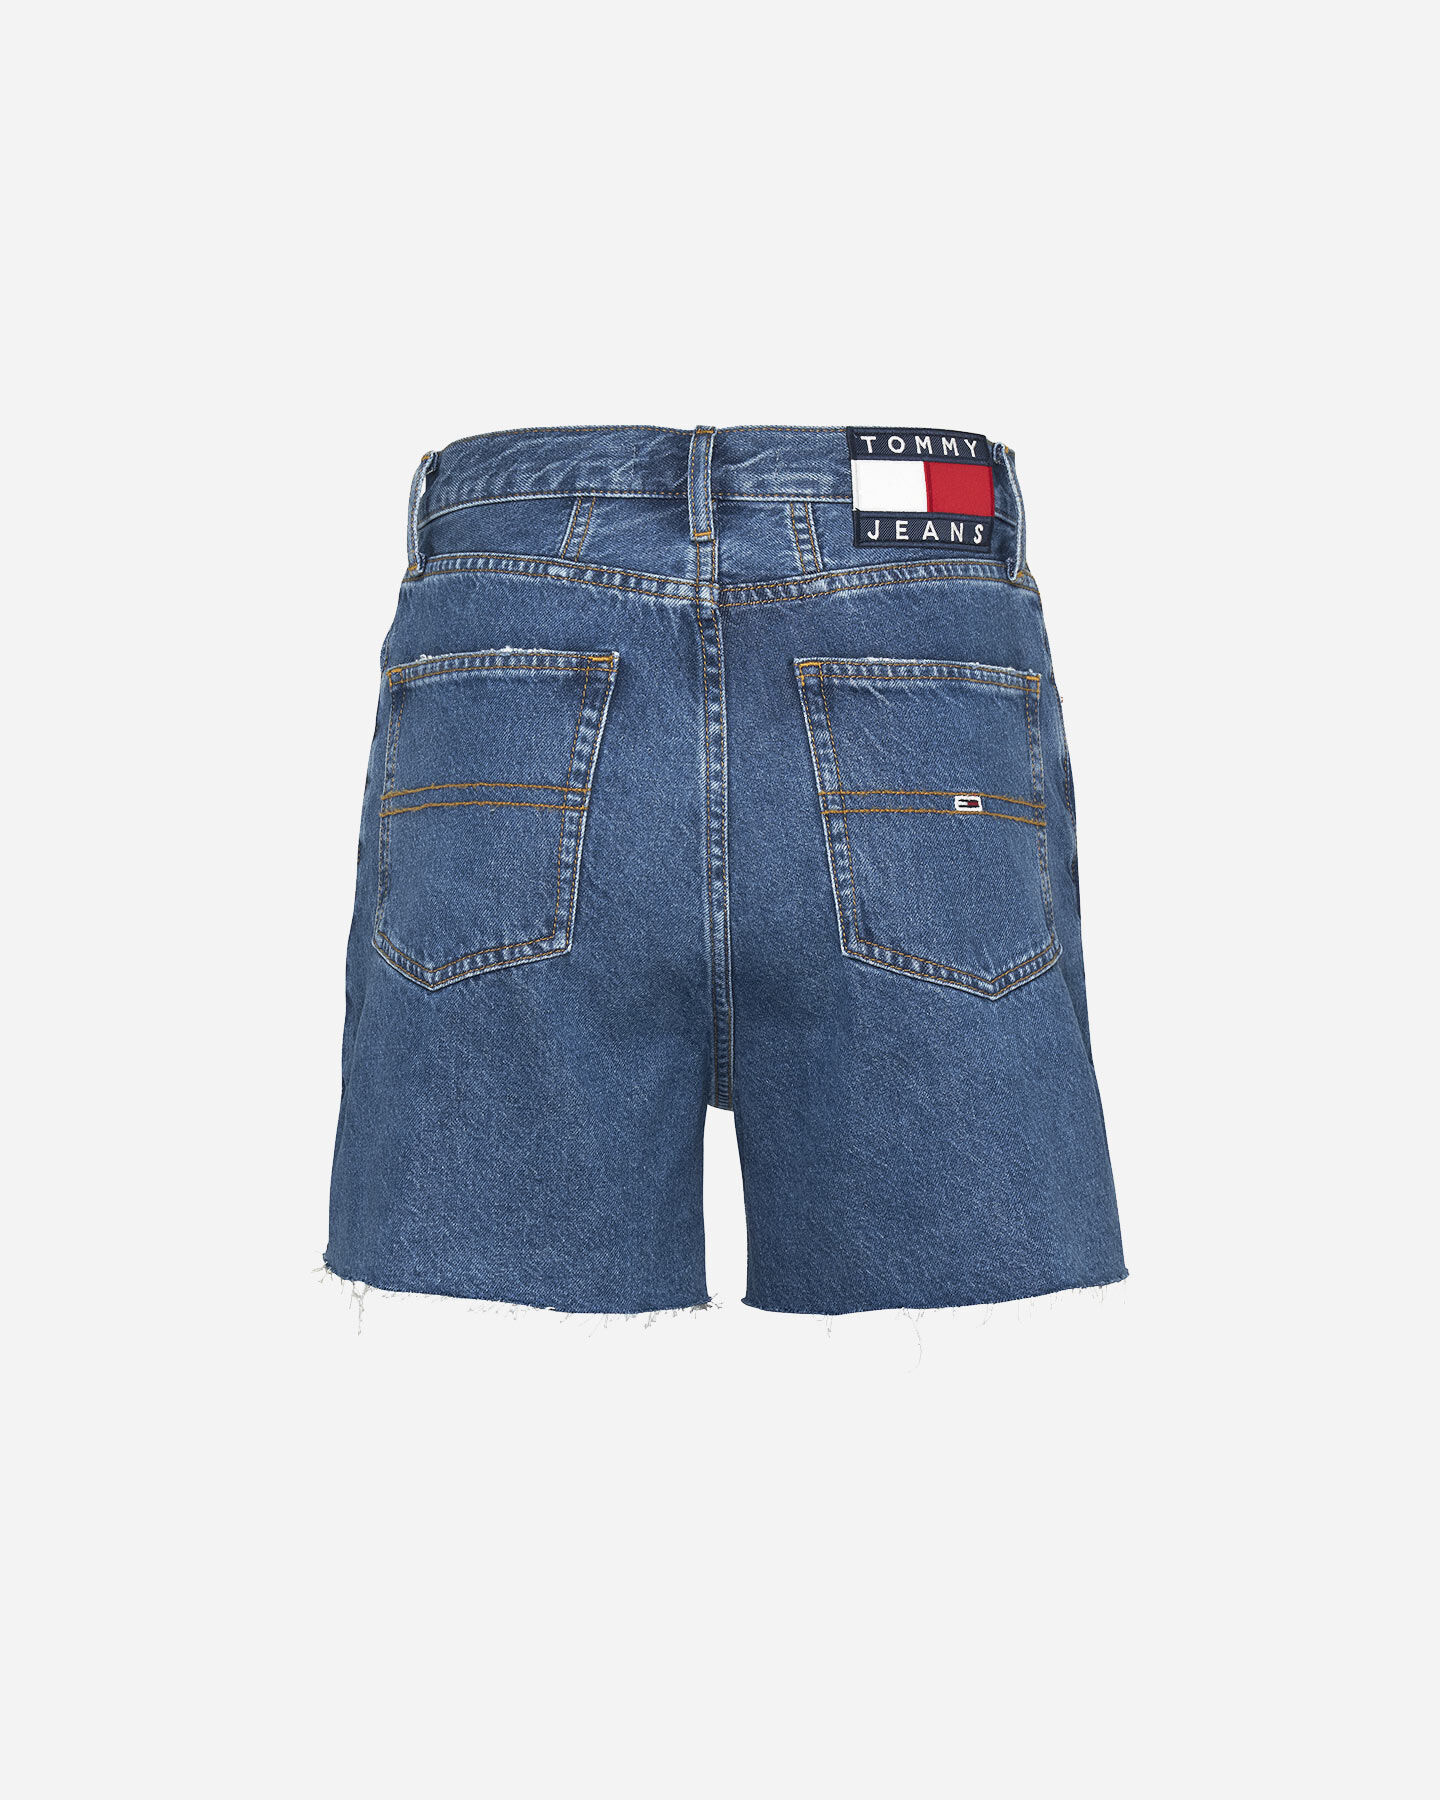  Jeans TOMMY HILFIGER MOM FIT W S4122982|1A5|26 scatto 1